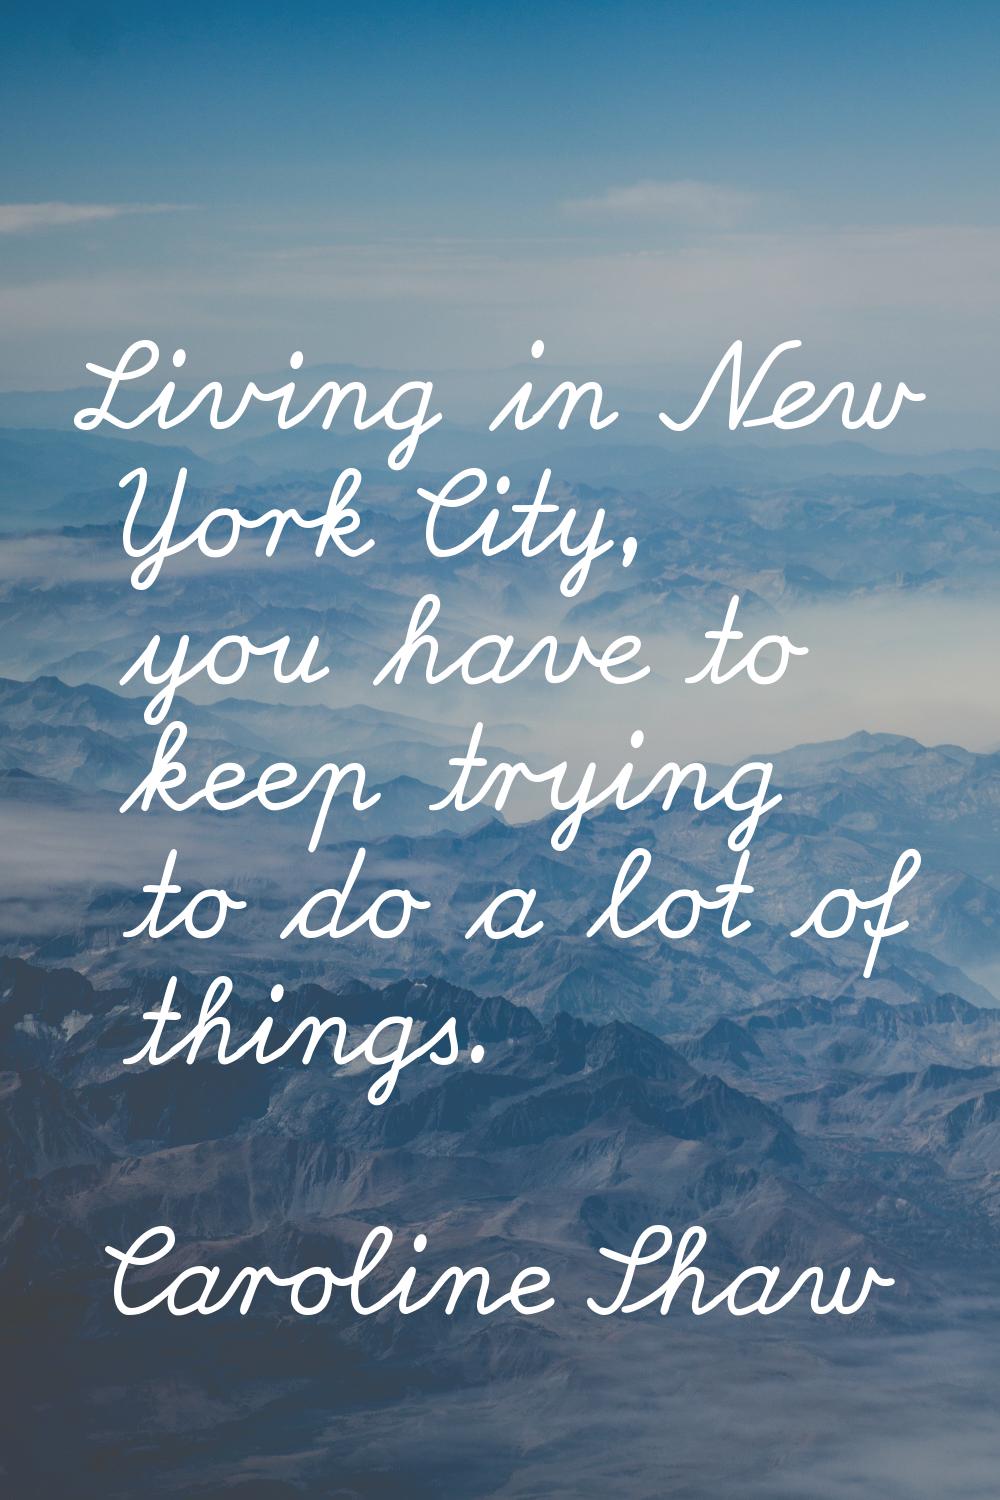 Living in New York City, you have to keep trying to do a lot of things.